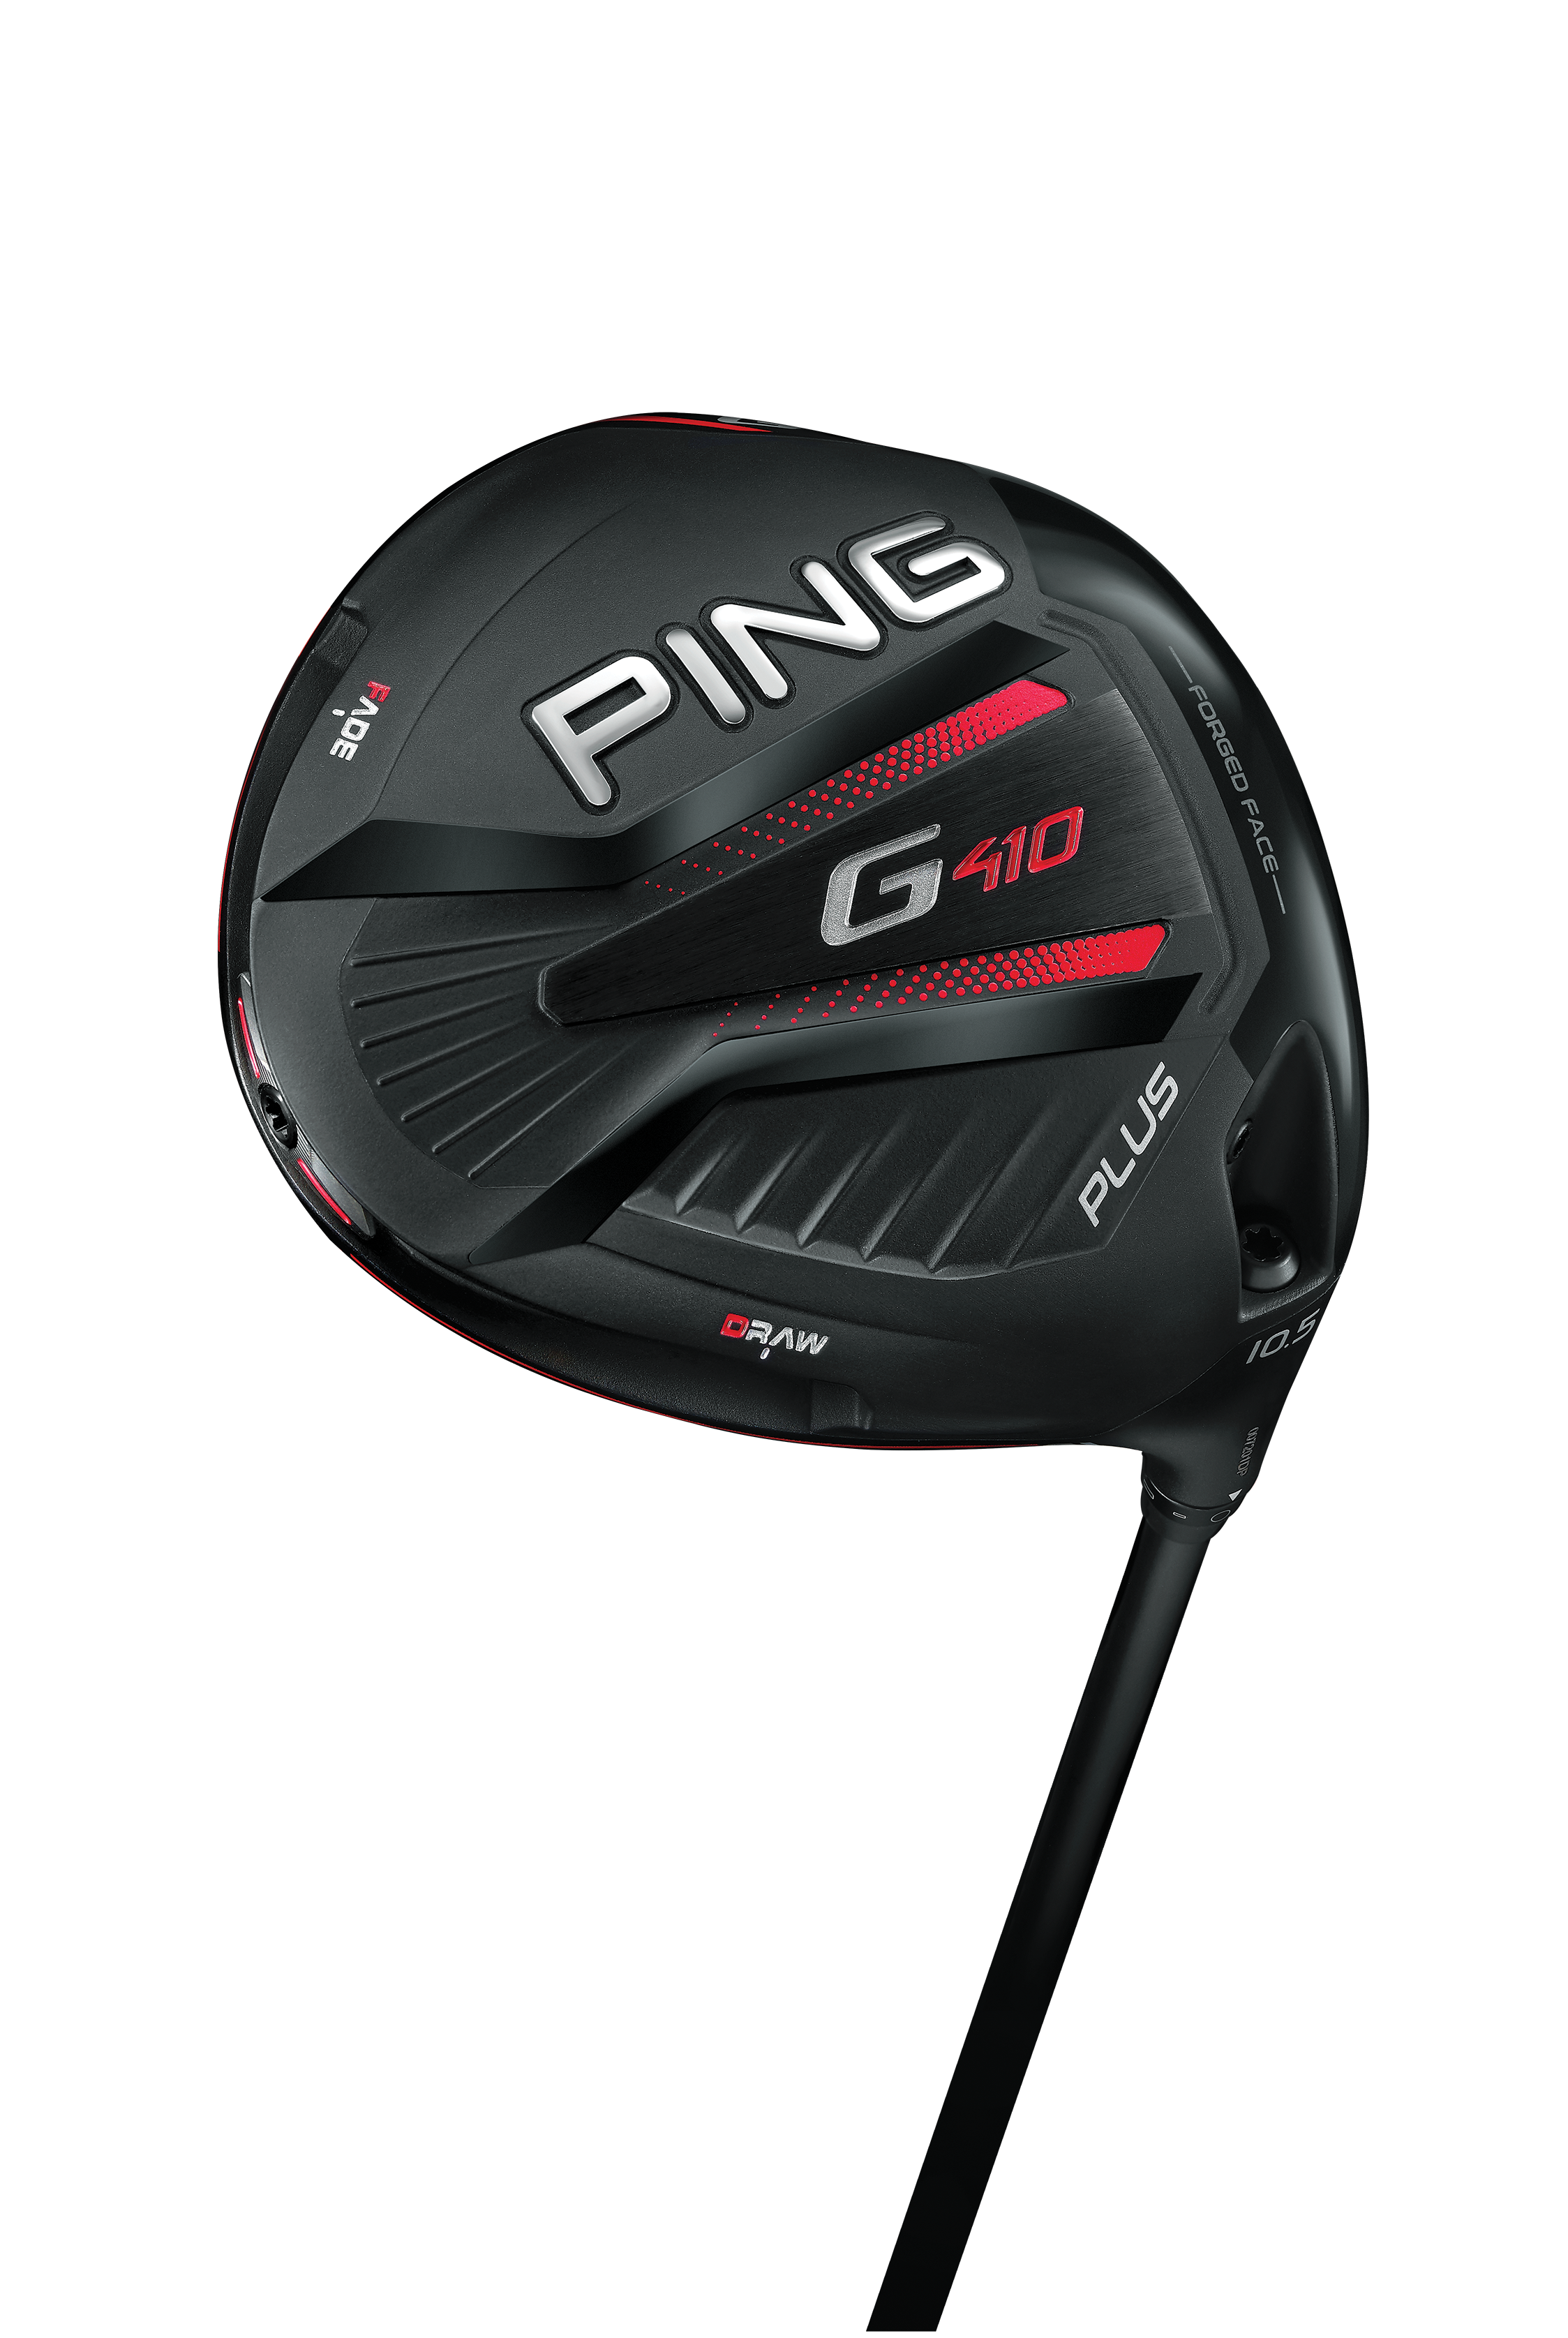 how to adjust ping g30 driver loft settings